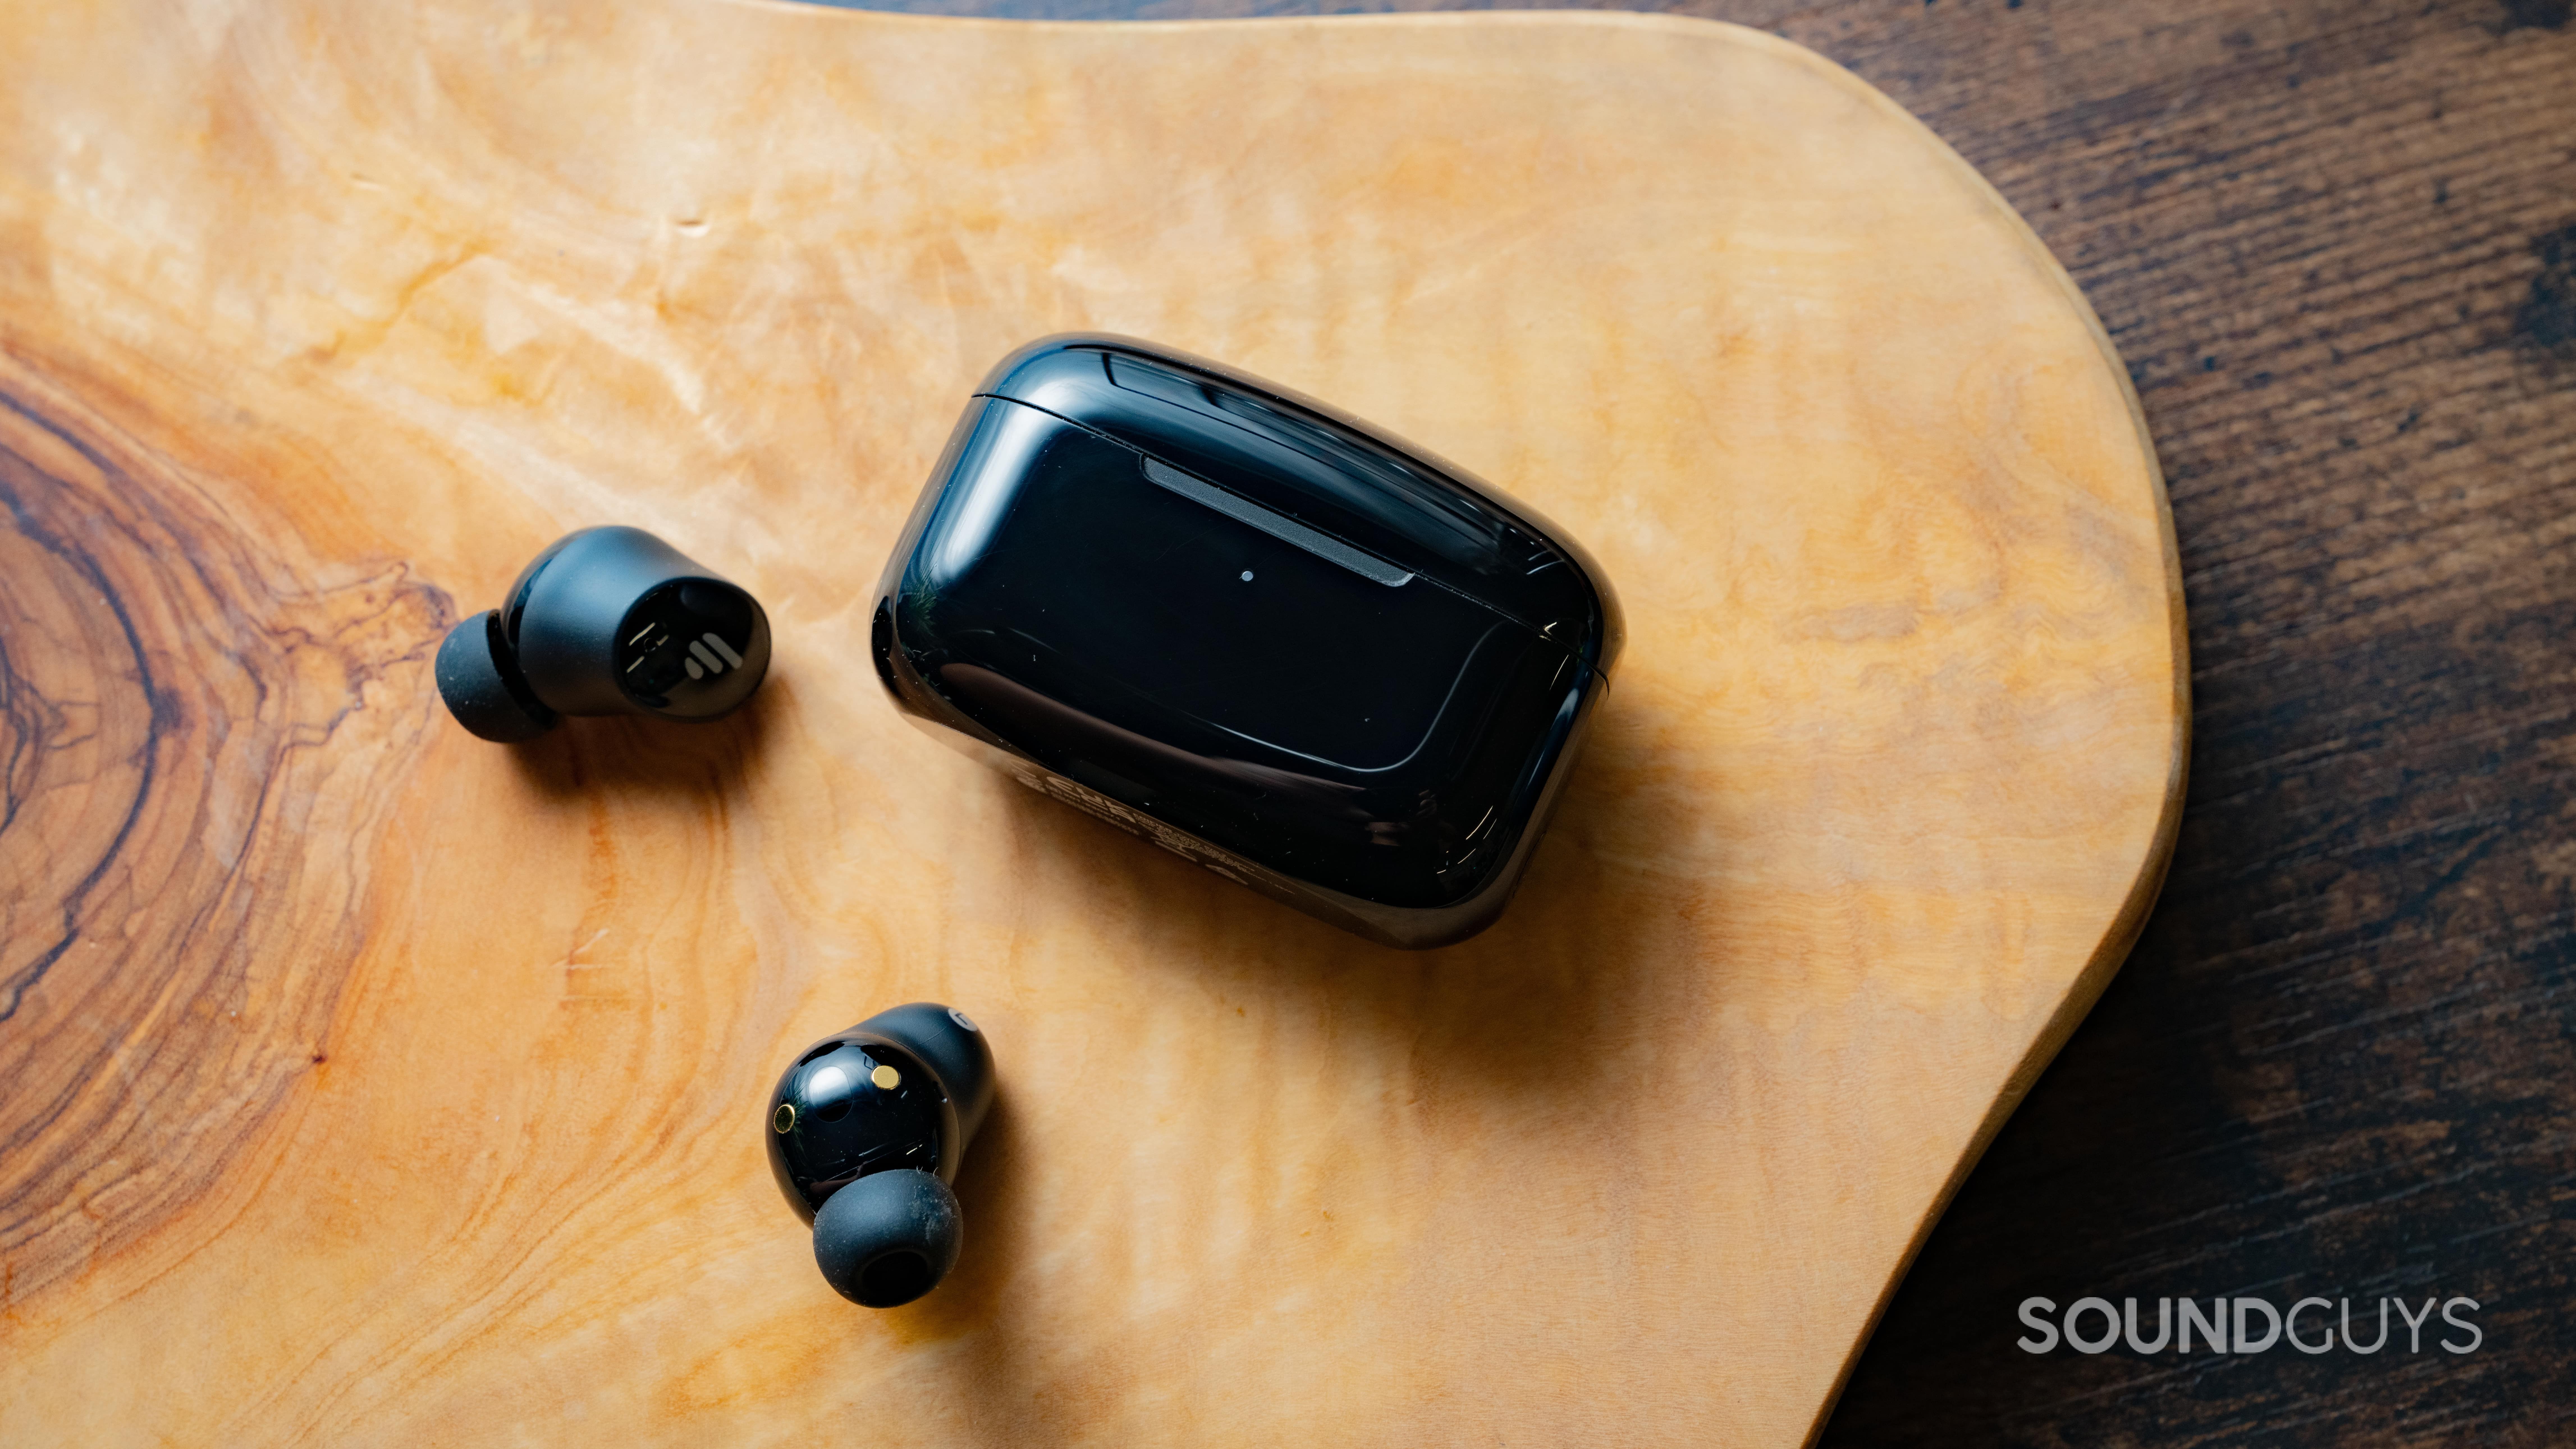 Edifier TWS1 Pro 2 earbuds next to their charging case.